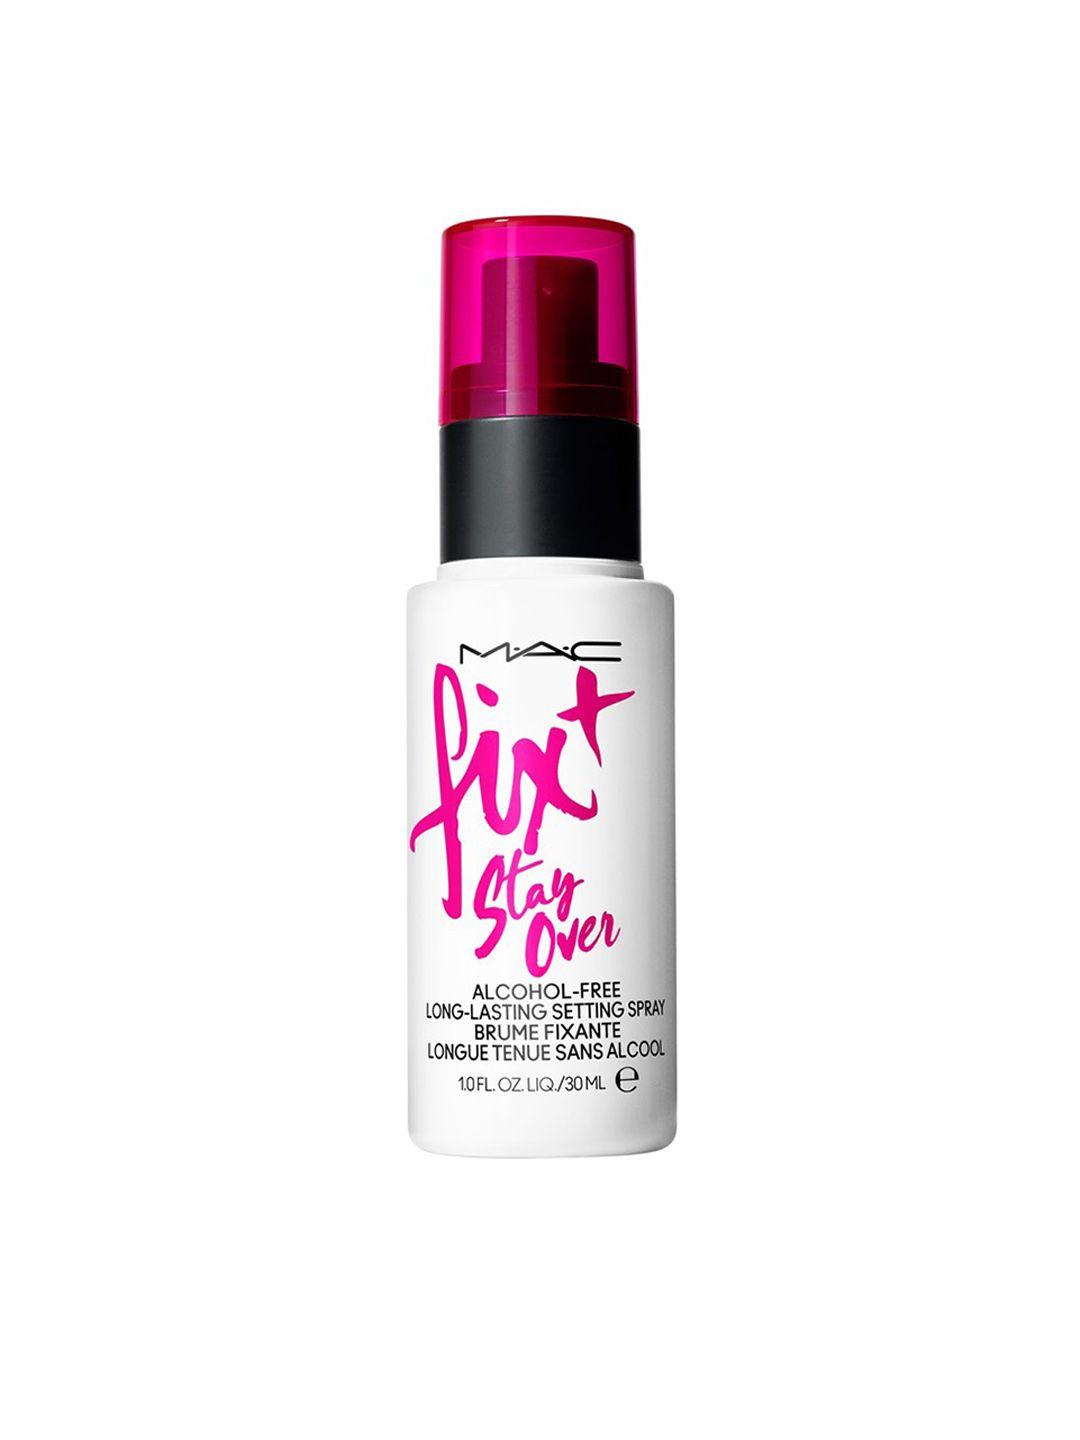 m.a.c fix+ stay over alcohol-free long lasting setting spray with cucumber extract - 30 ml